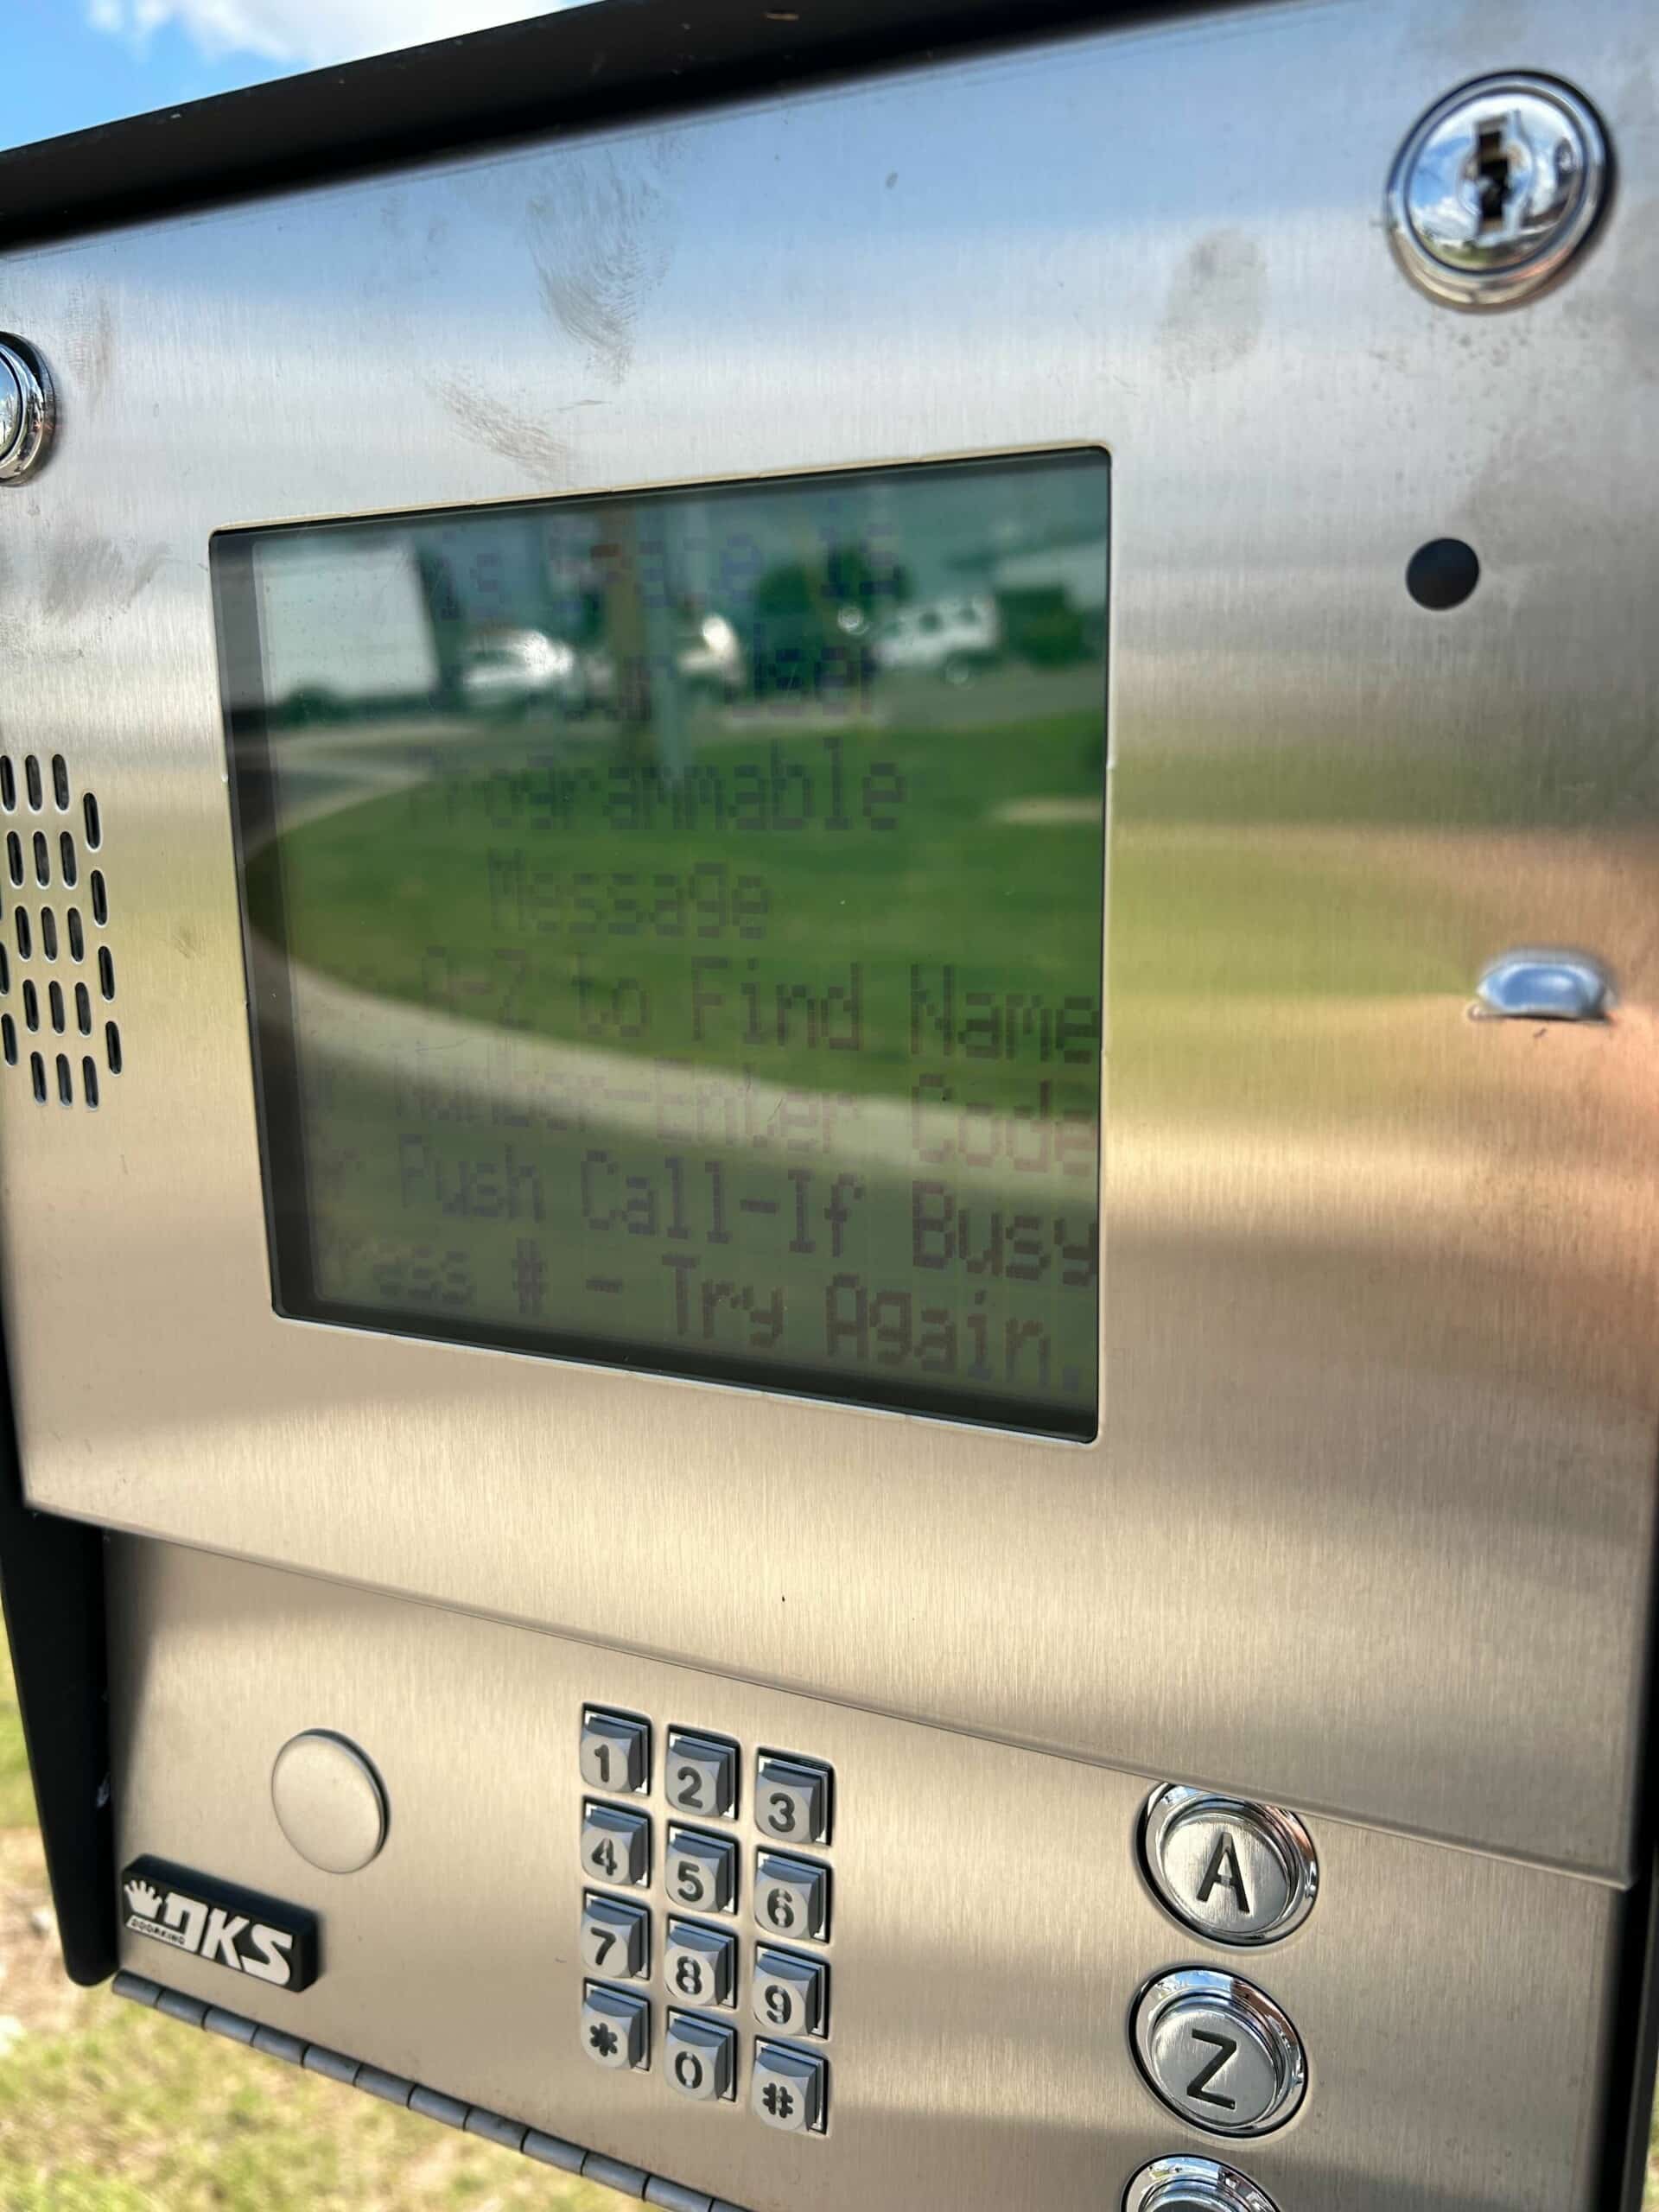 Keypad with intercom feature installed at apartment for access control.